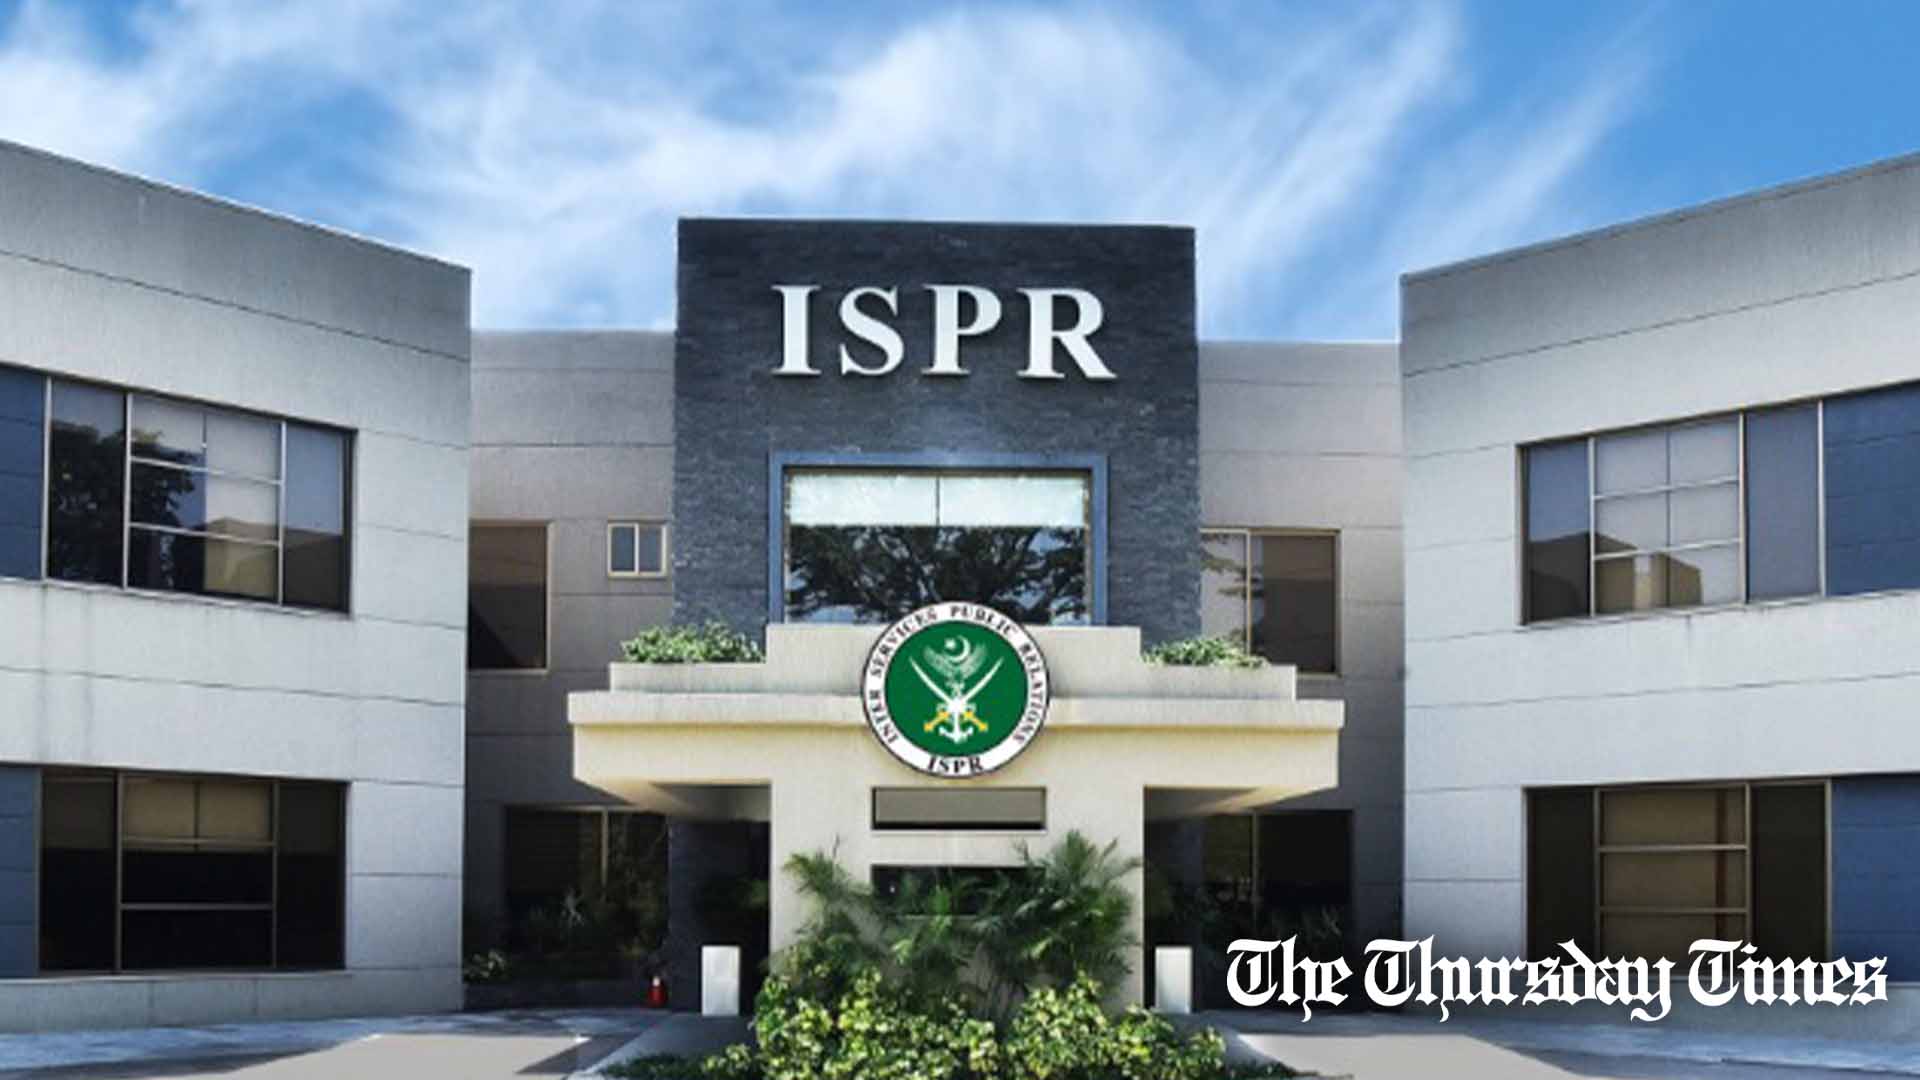 A file photo is shown of the ISPR headquarters at Rawalpindi. — FILE/THE THURSDAY TIMES